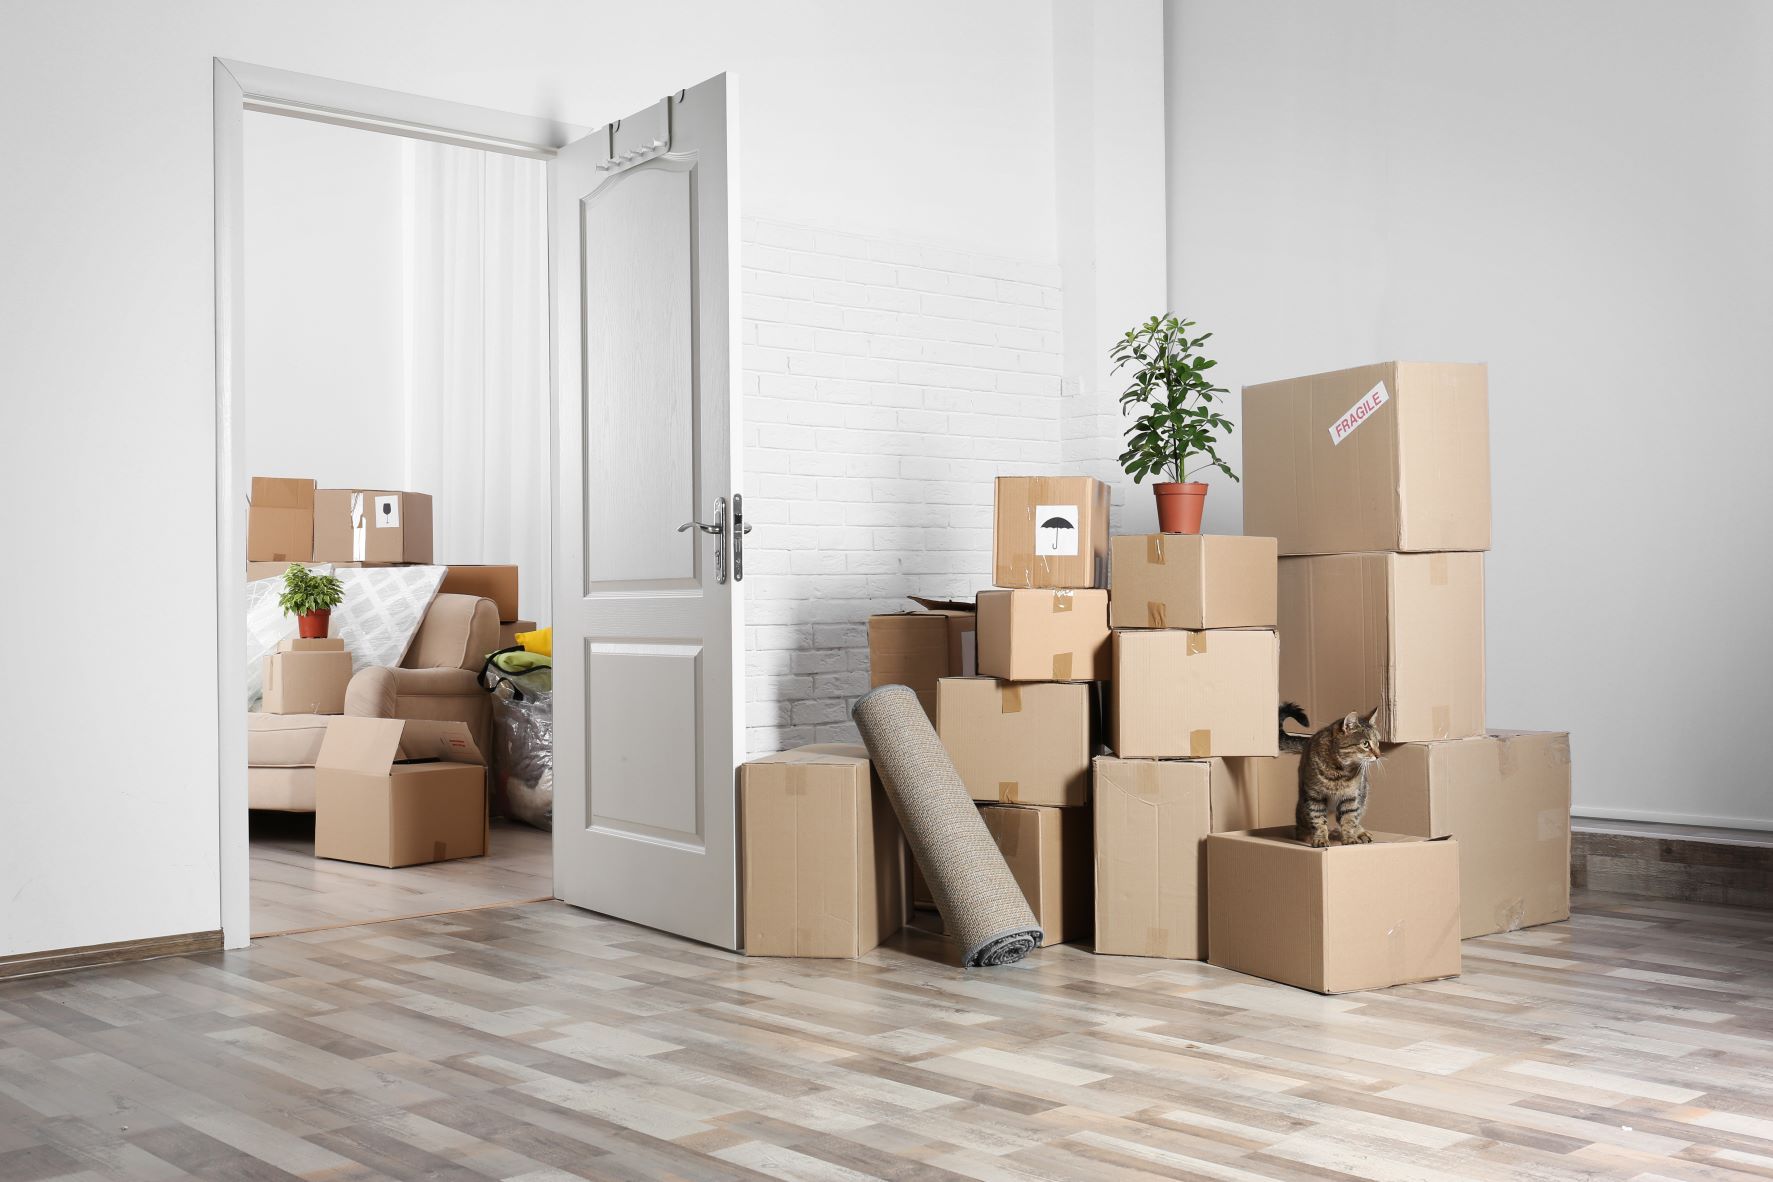 Top 5 Ways To Cut Costs While Moving